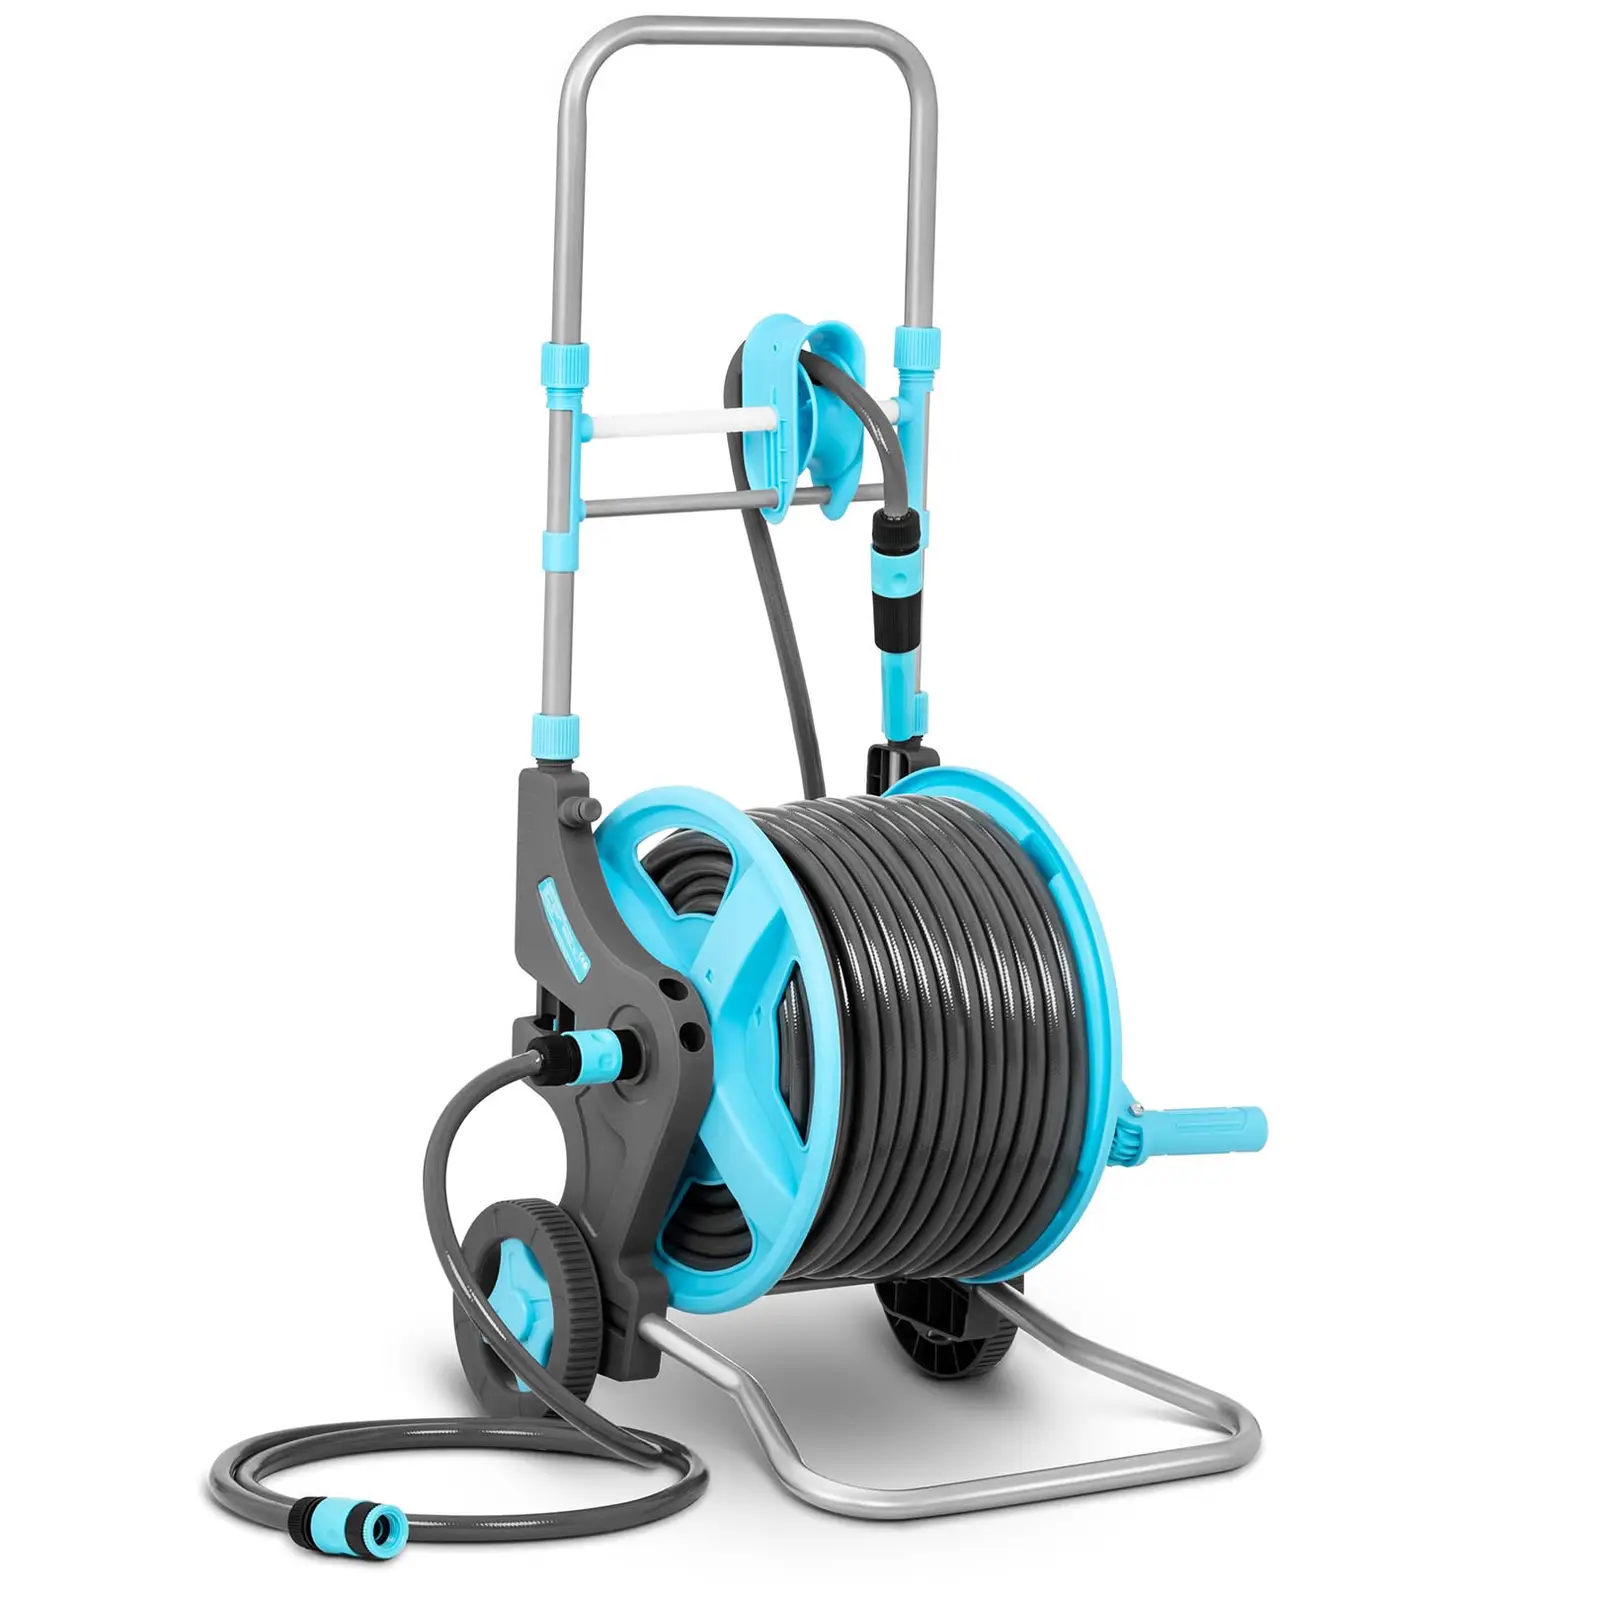 Water Hose Reel with Hose - 45 m